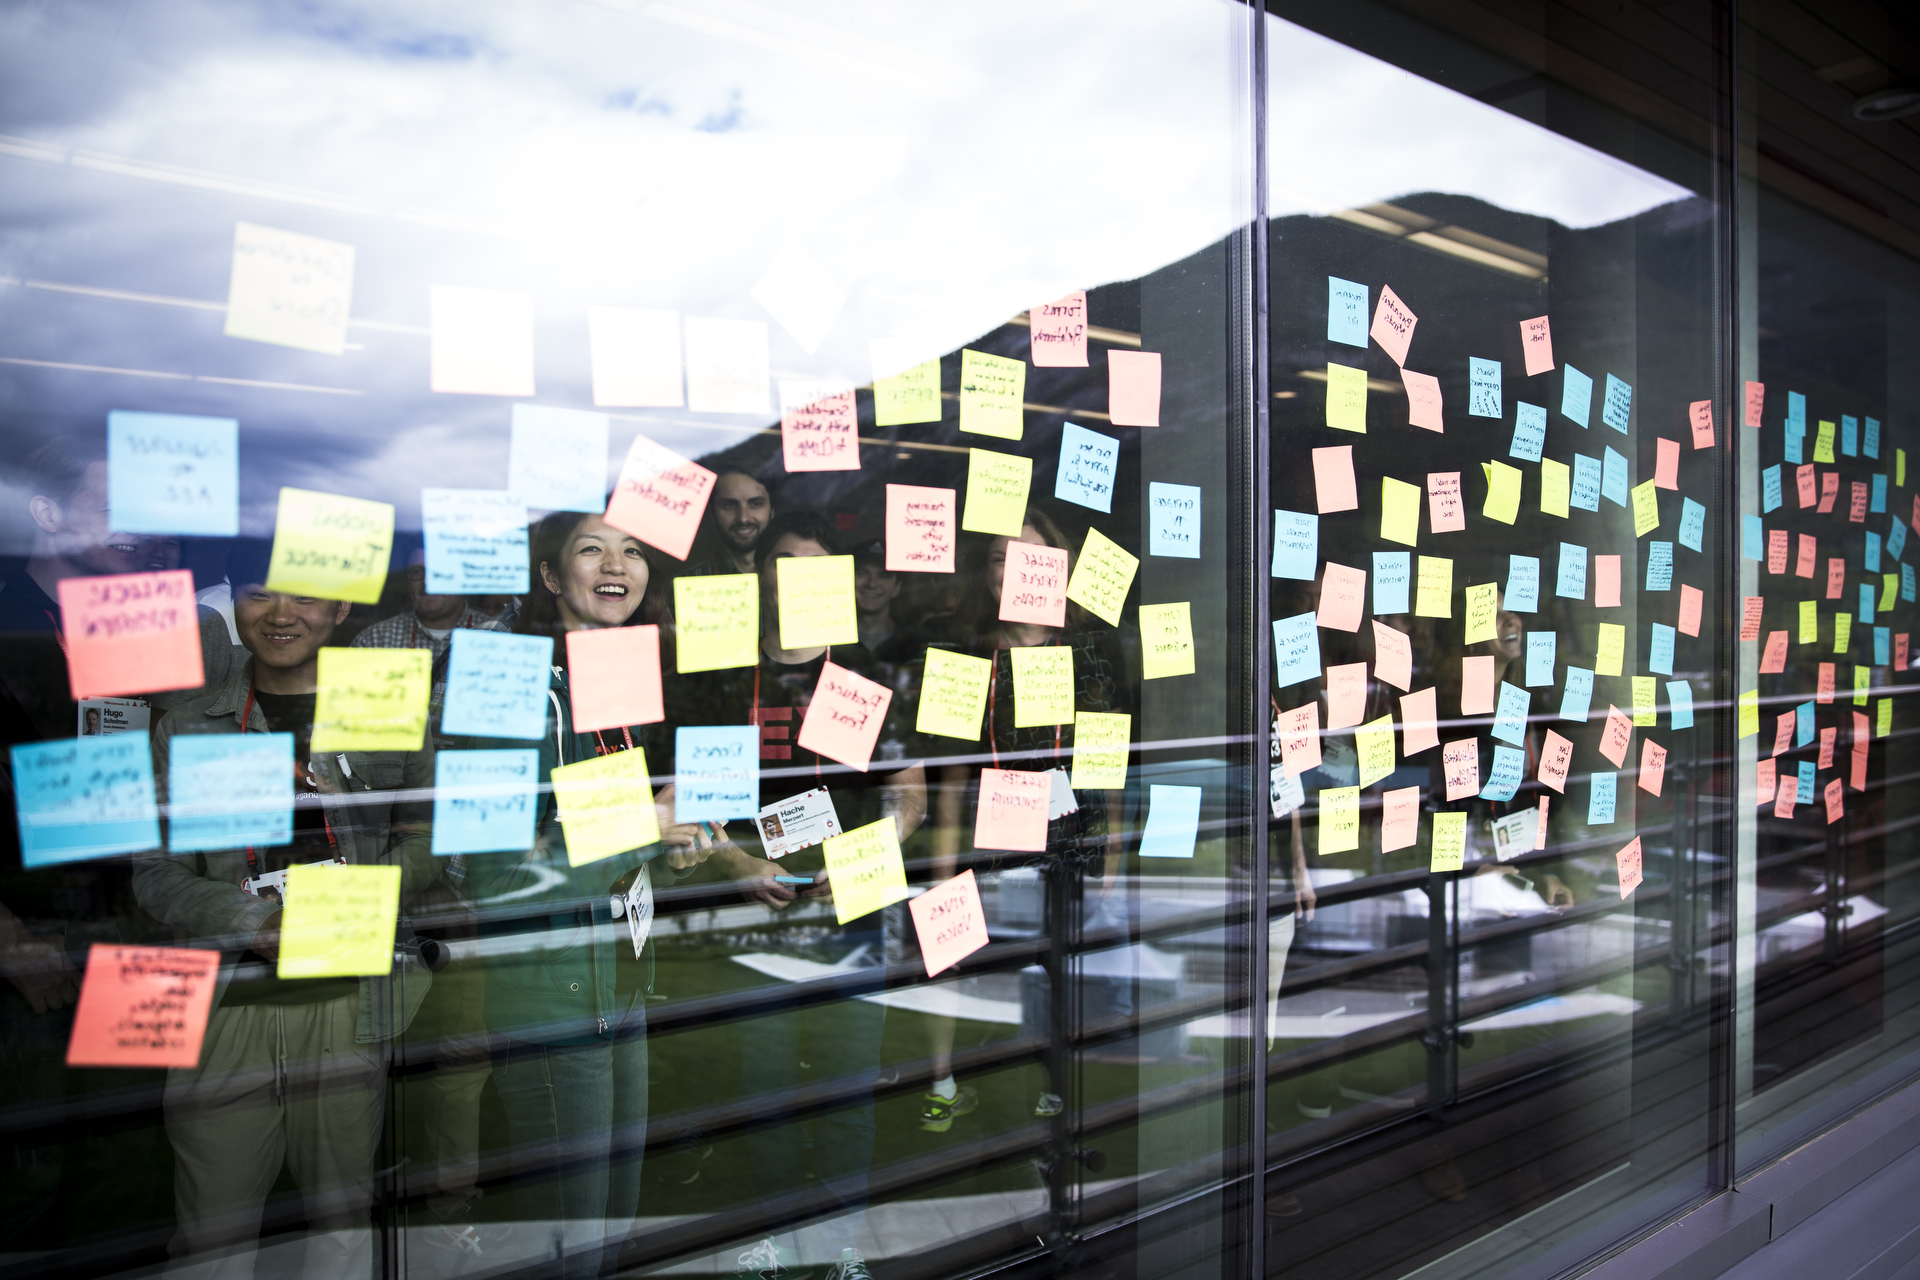 Post-it notes on a windo reflect the mountains of Banff outside, in a scene from the TEDx Global Forum meeting at TEDSummit 2016, June 25, 2016, Banff, Canada. Photo: Marla Aufmuth / TED